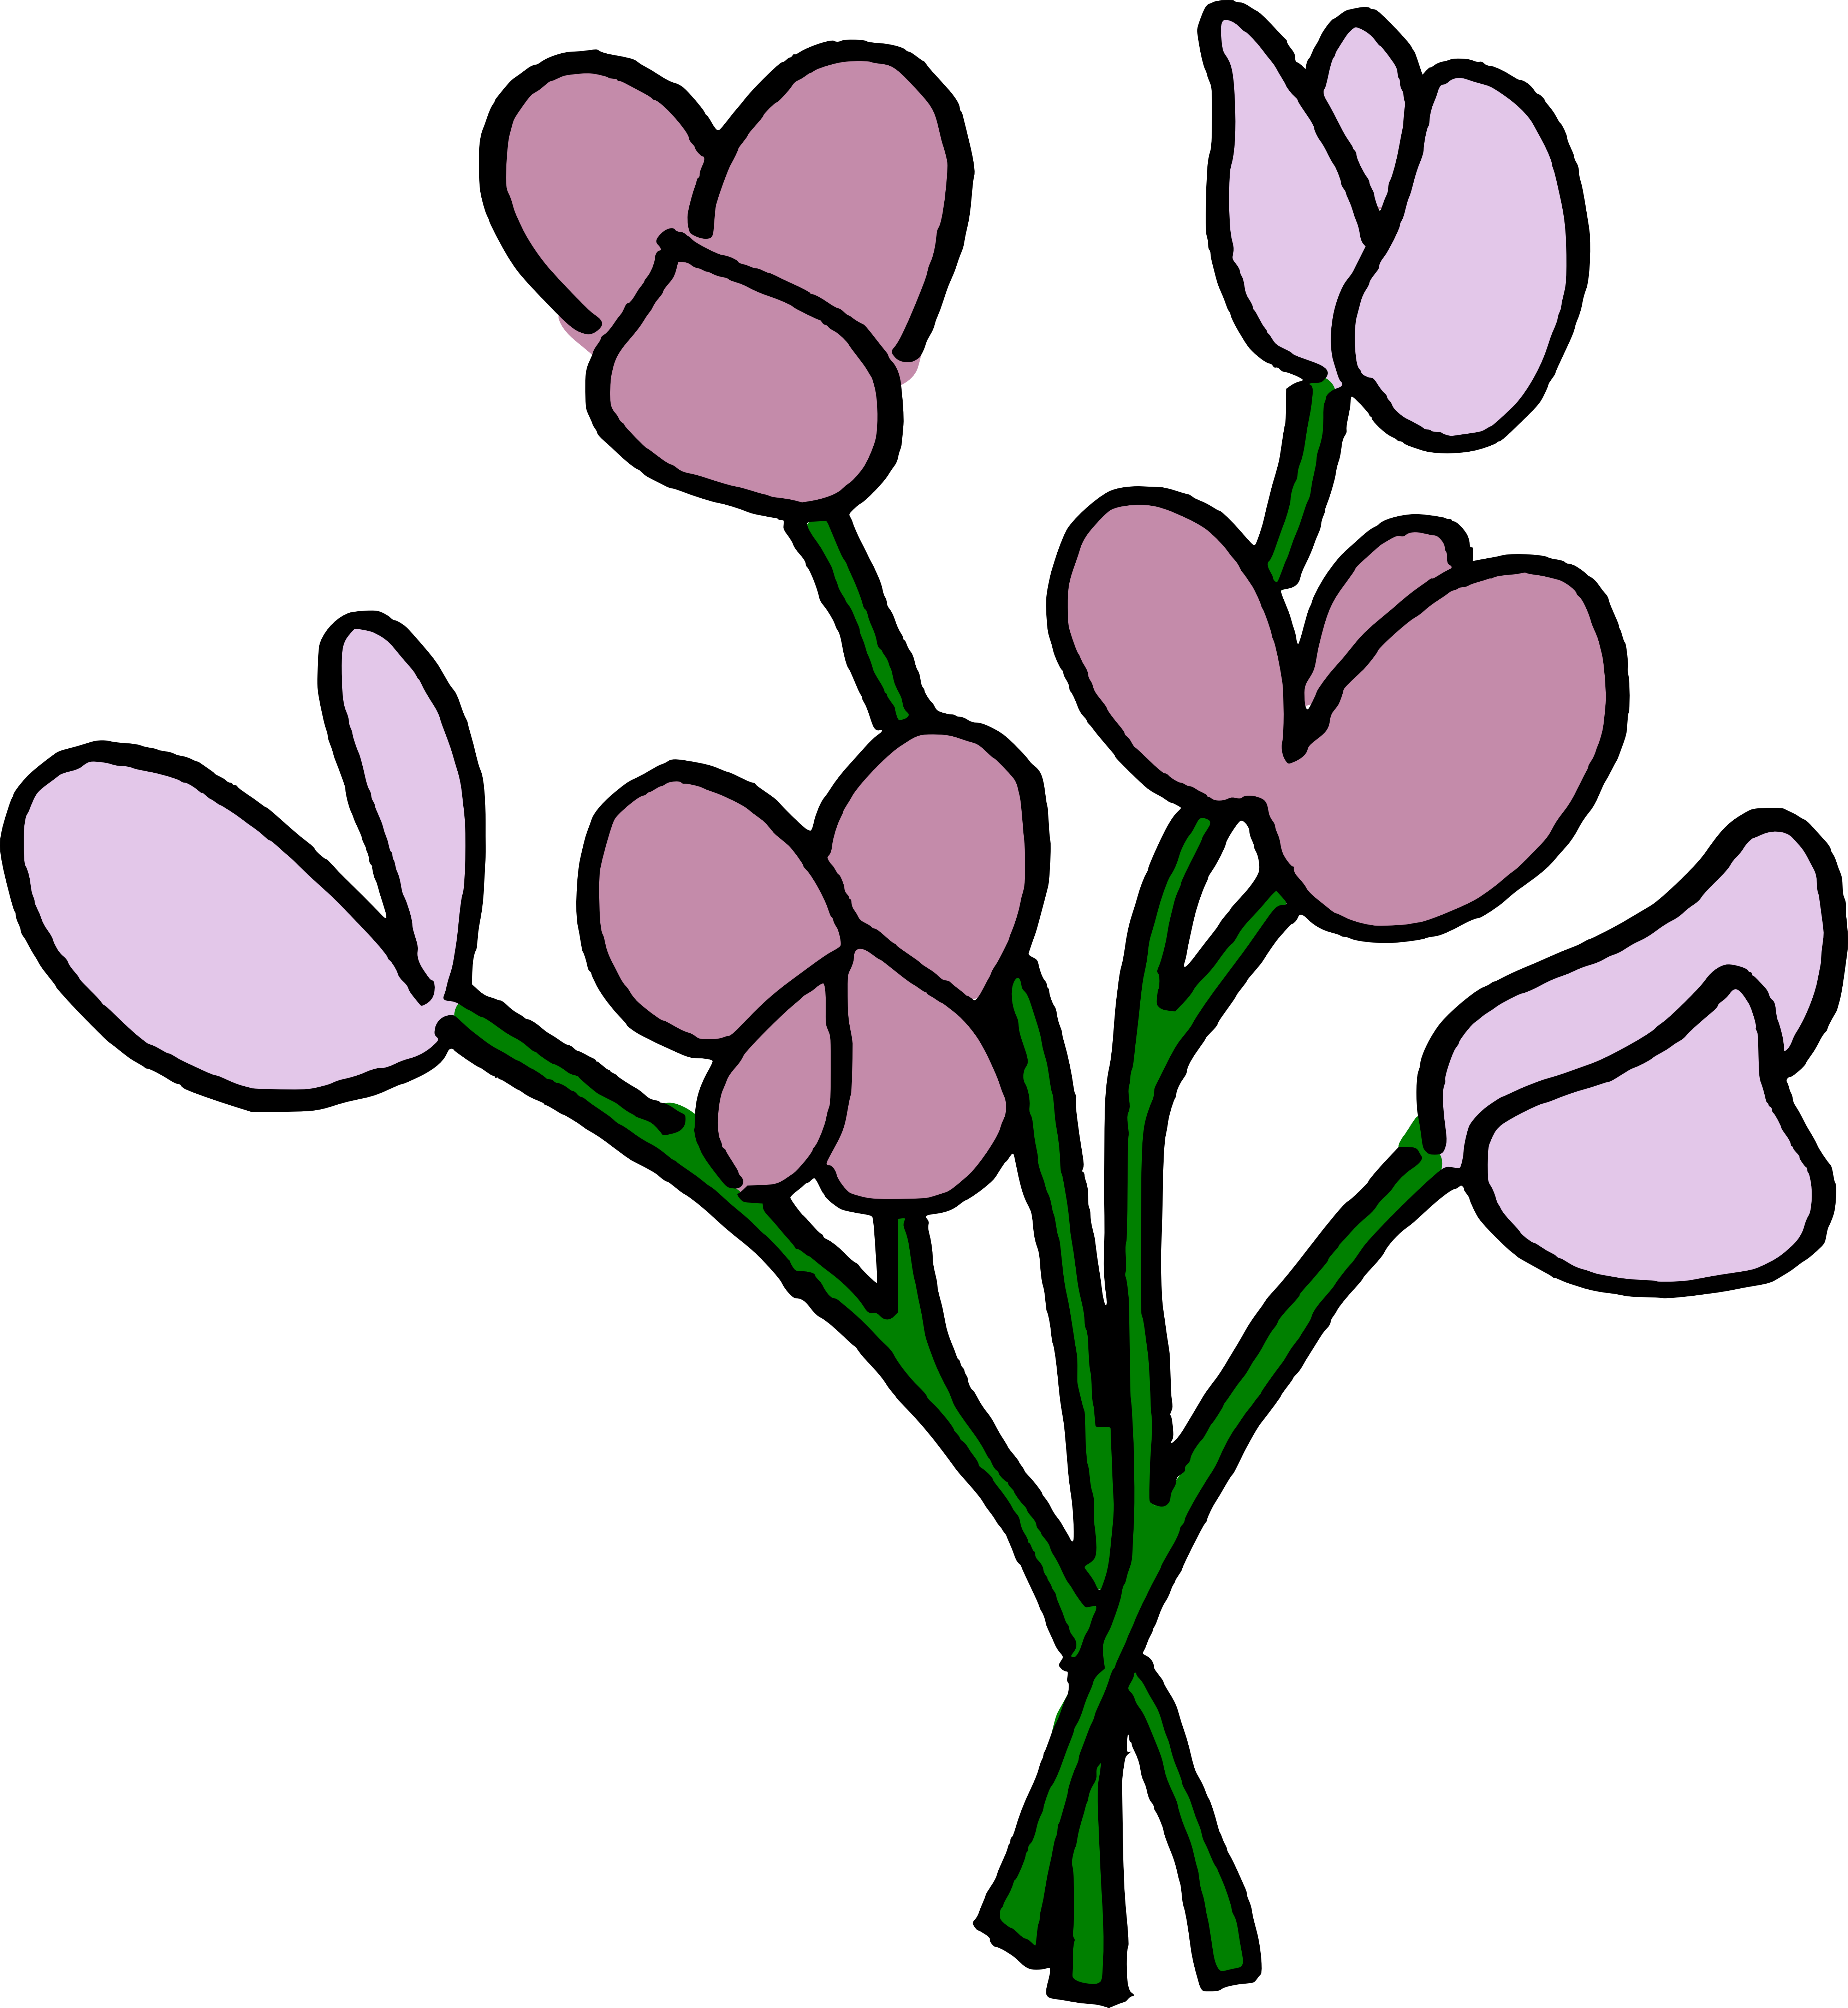 Flowers clipart name.